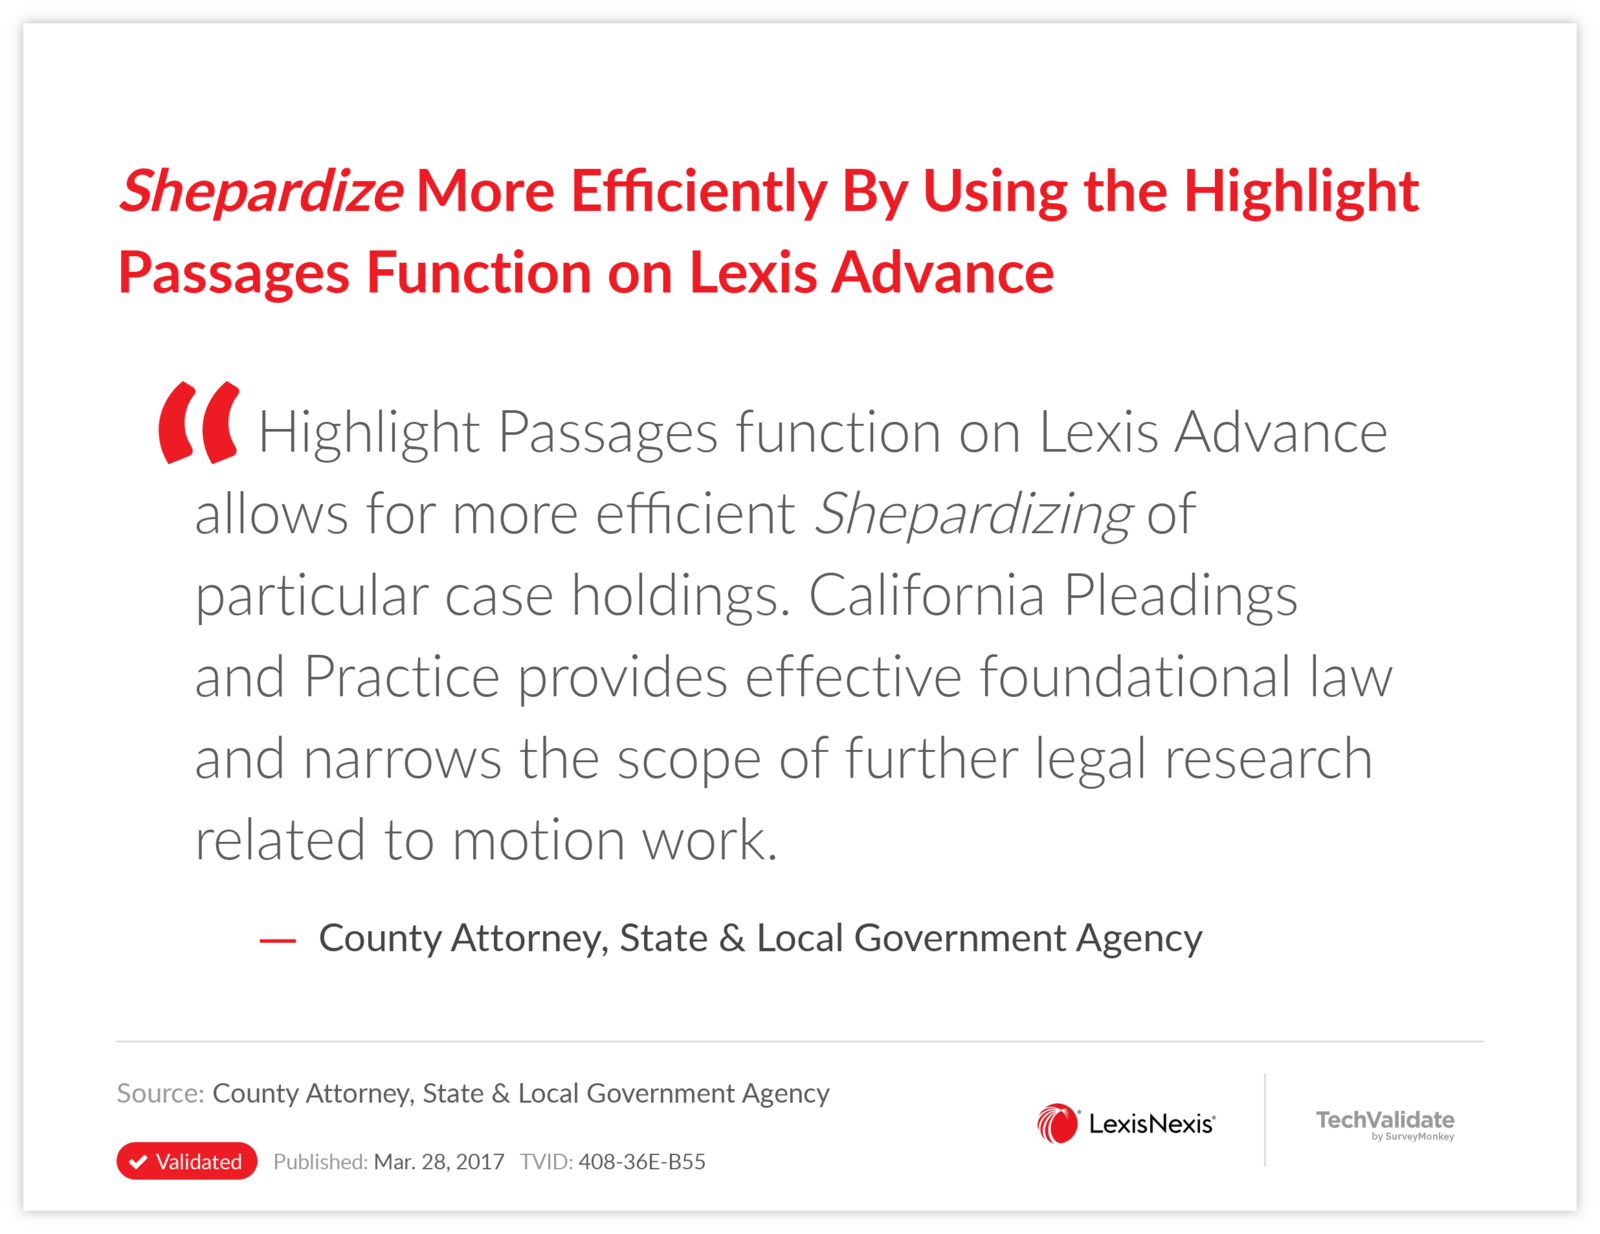 Shepardize More Efficiently By Using the Highlight Passages Function on Lexis Advance